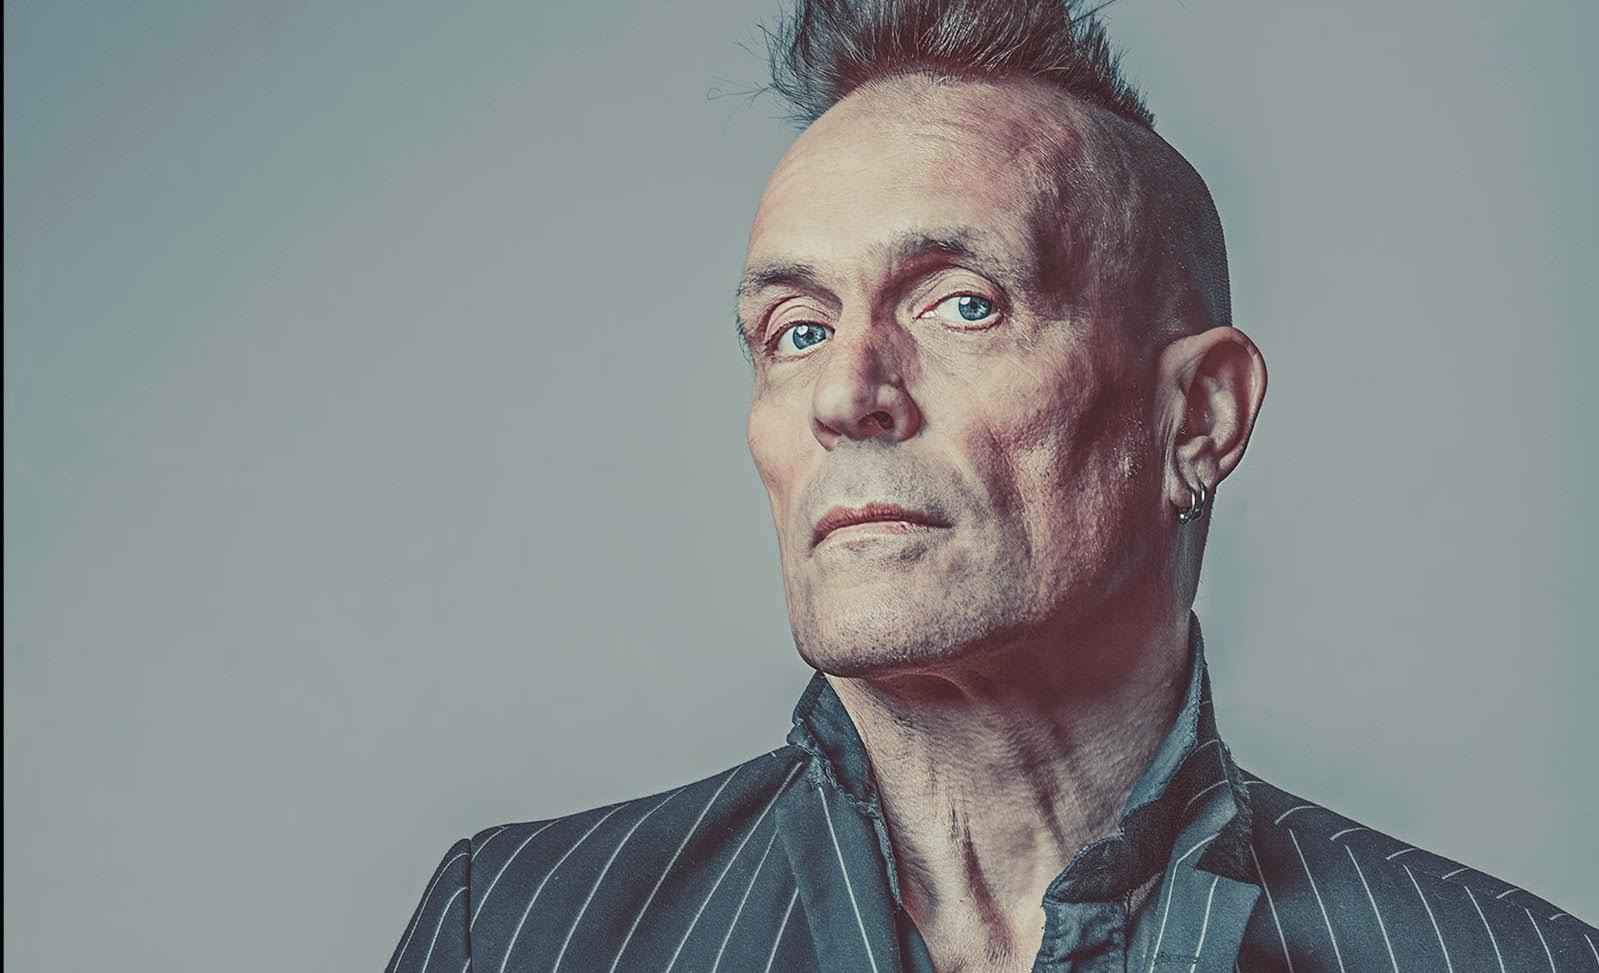 John Robb's deep in the Art of Darkness Alan Rider reviews John Robb's A History of Goth, The Art of Darkness